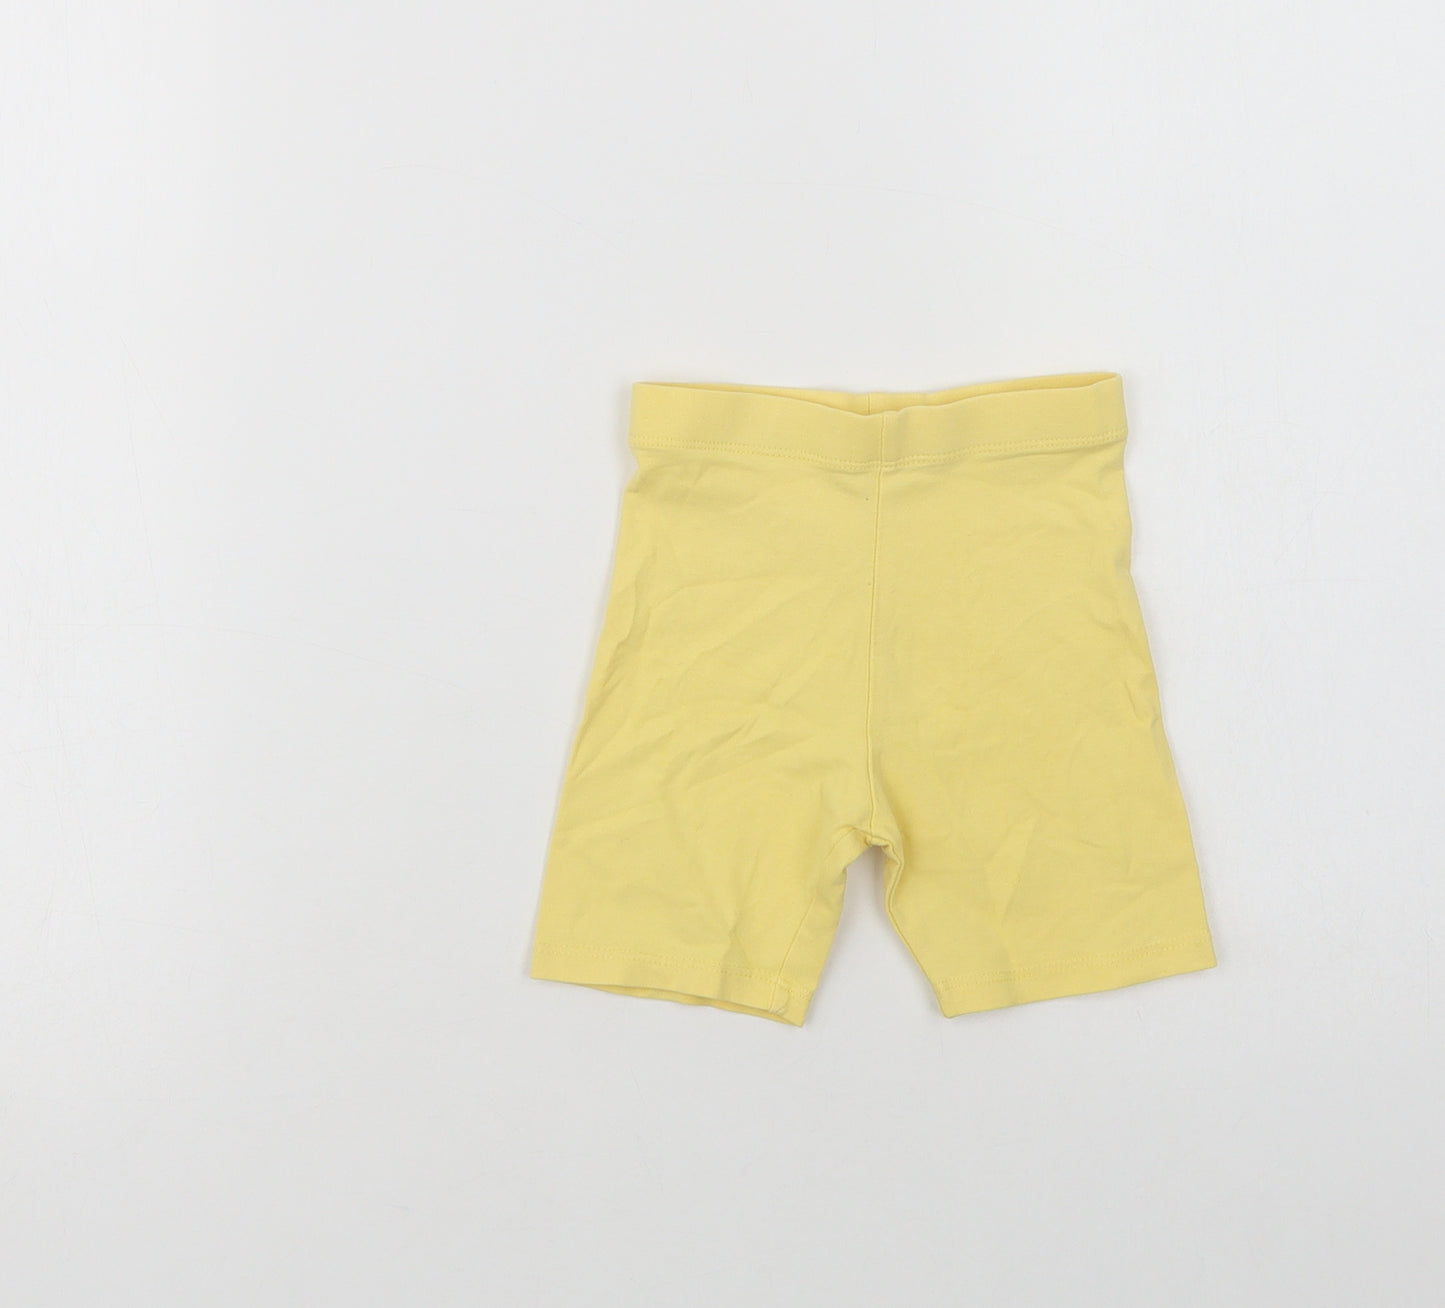 George Girls Yellow  Cotton Compression Shorts Size 2-3 Years  Regular